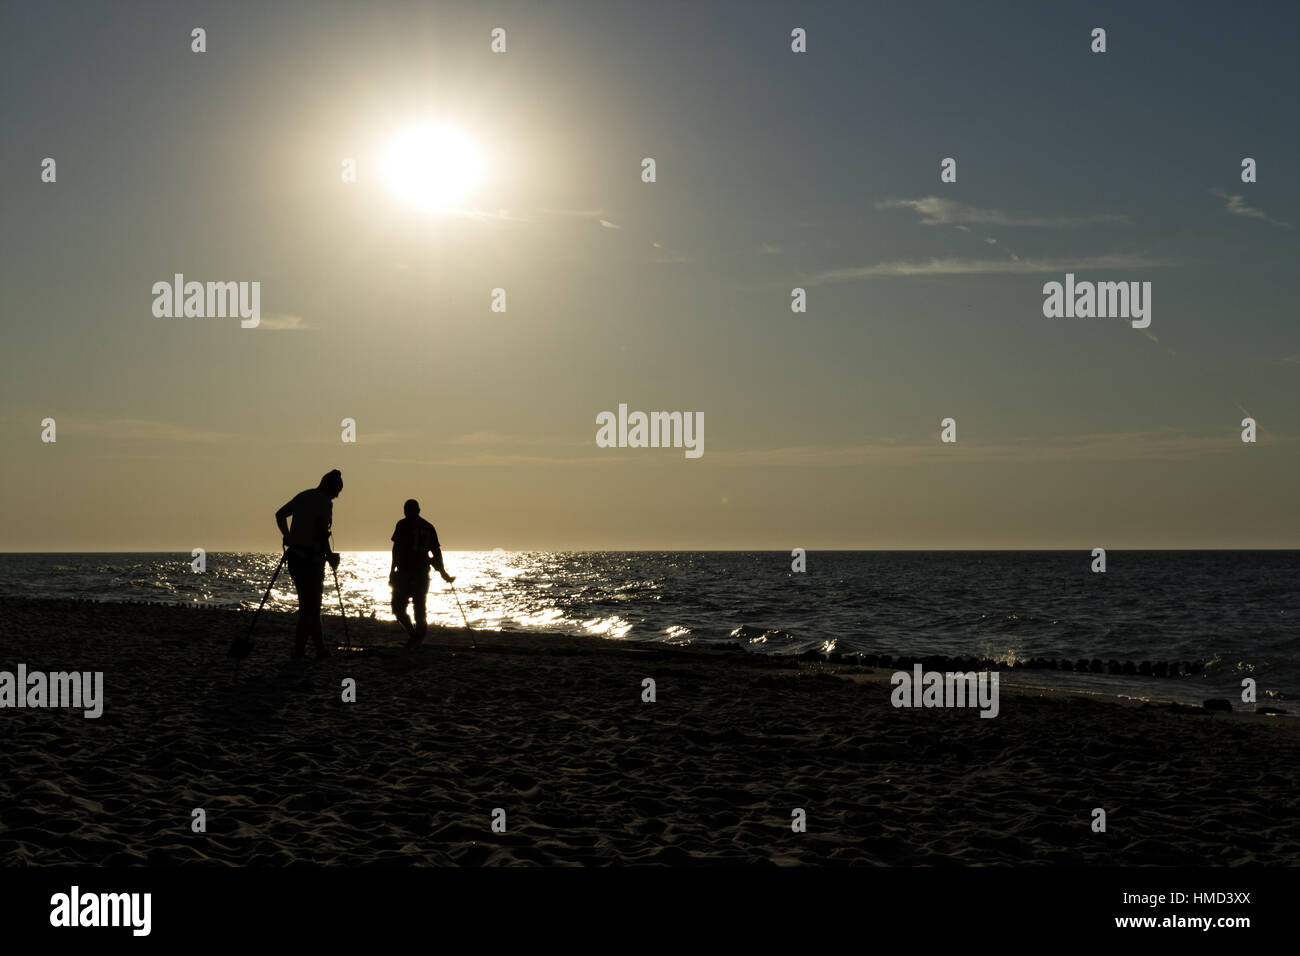 Two sappers searching for treasures on the beach Stock Photo